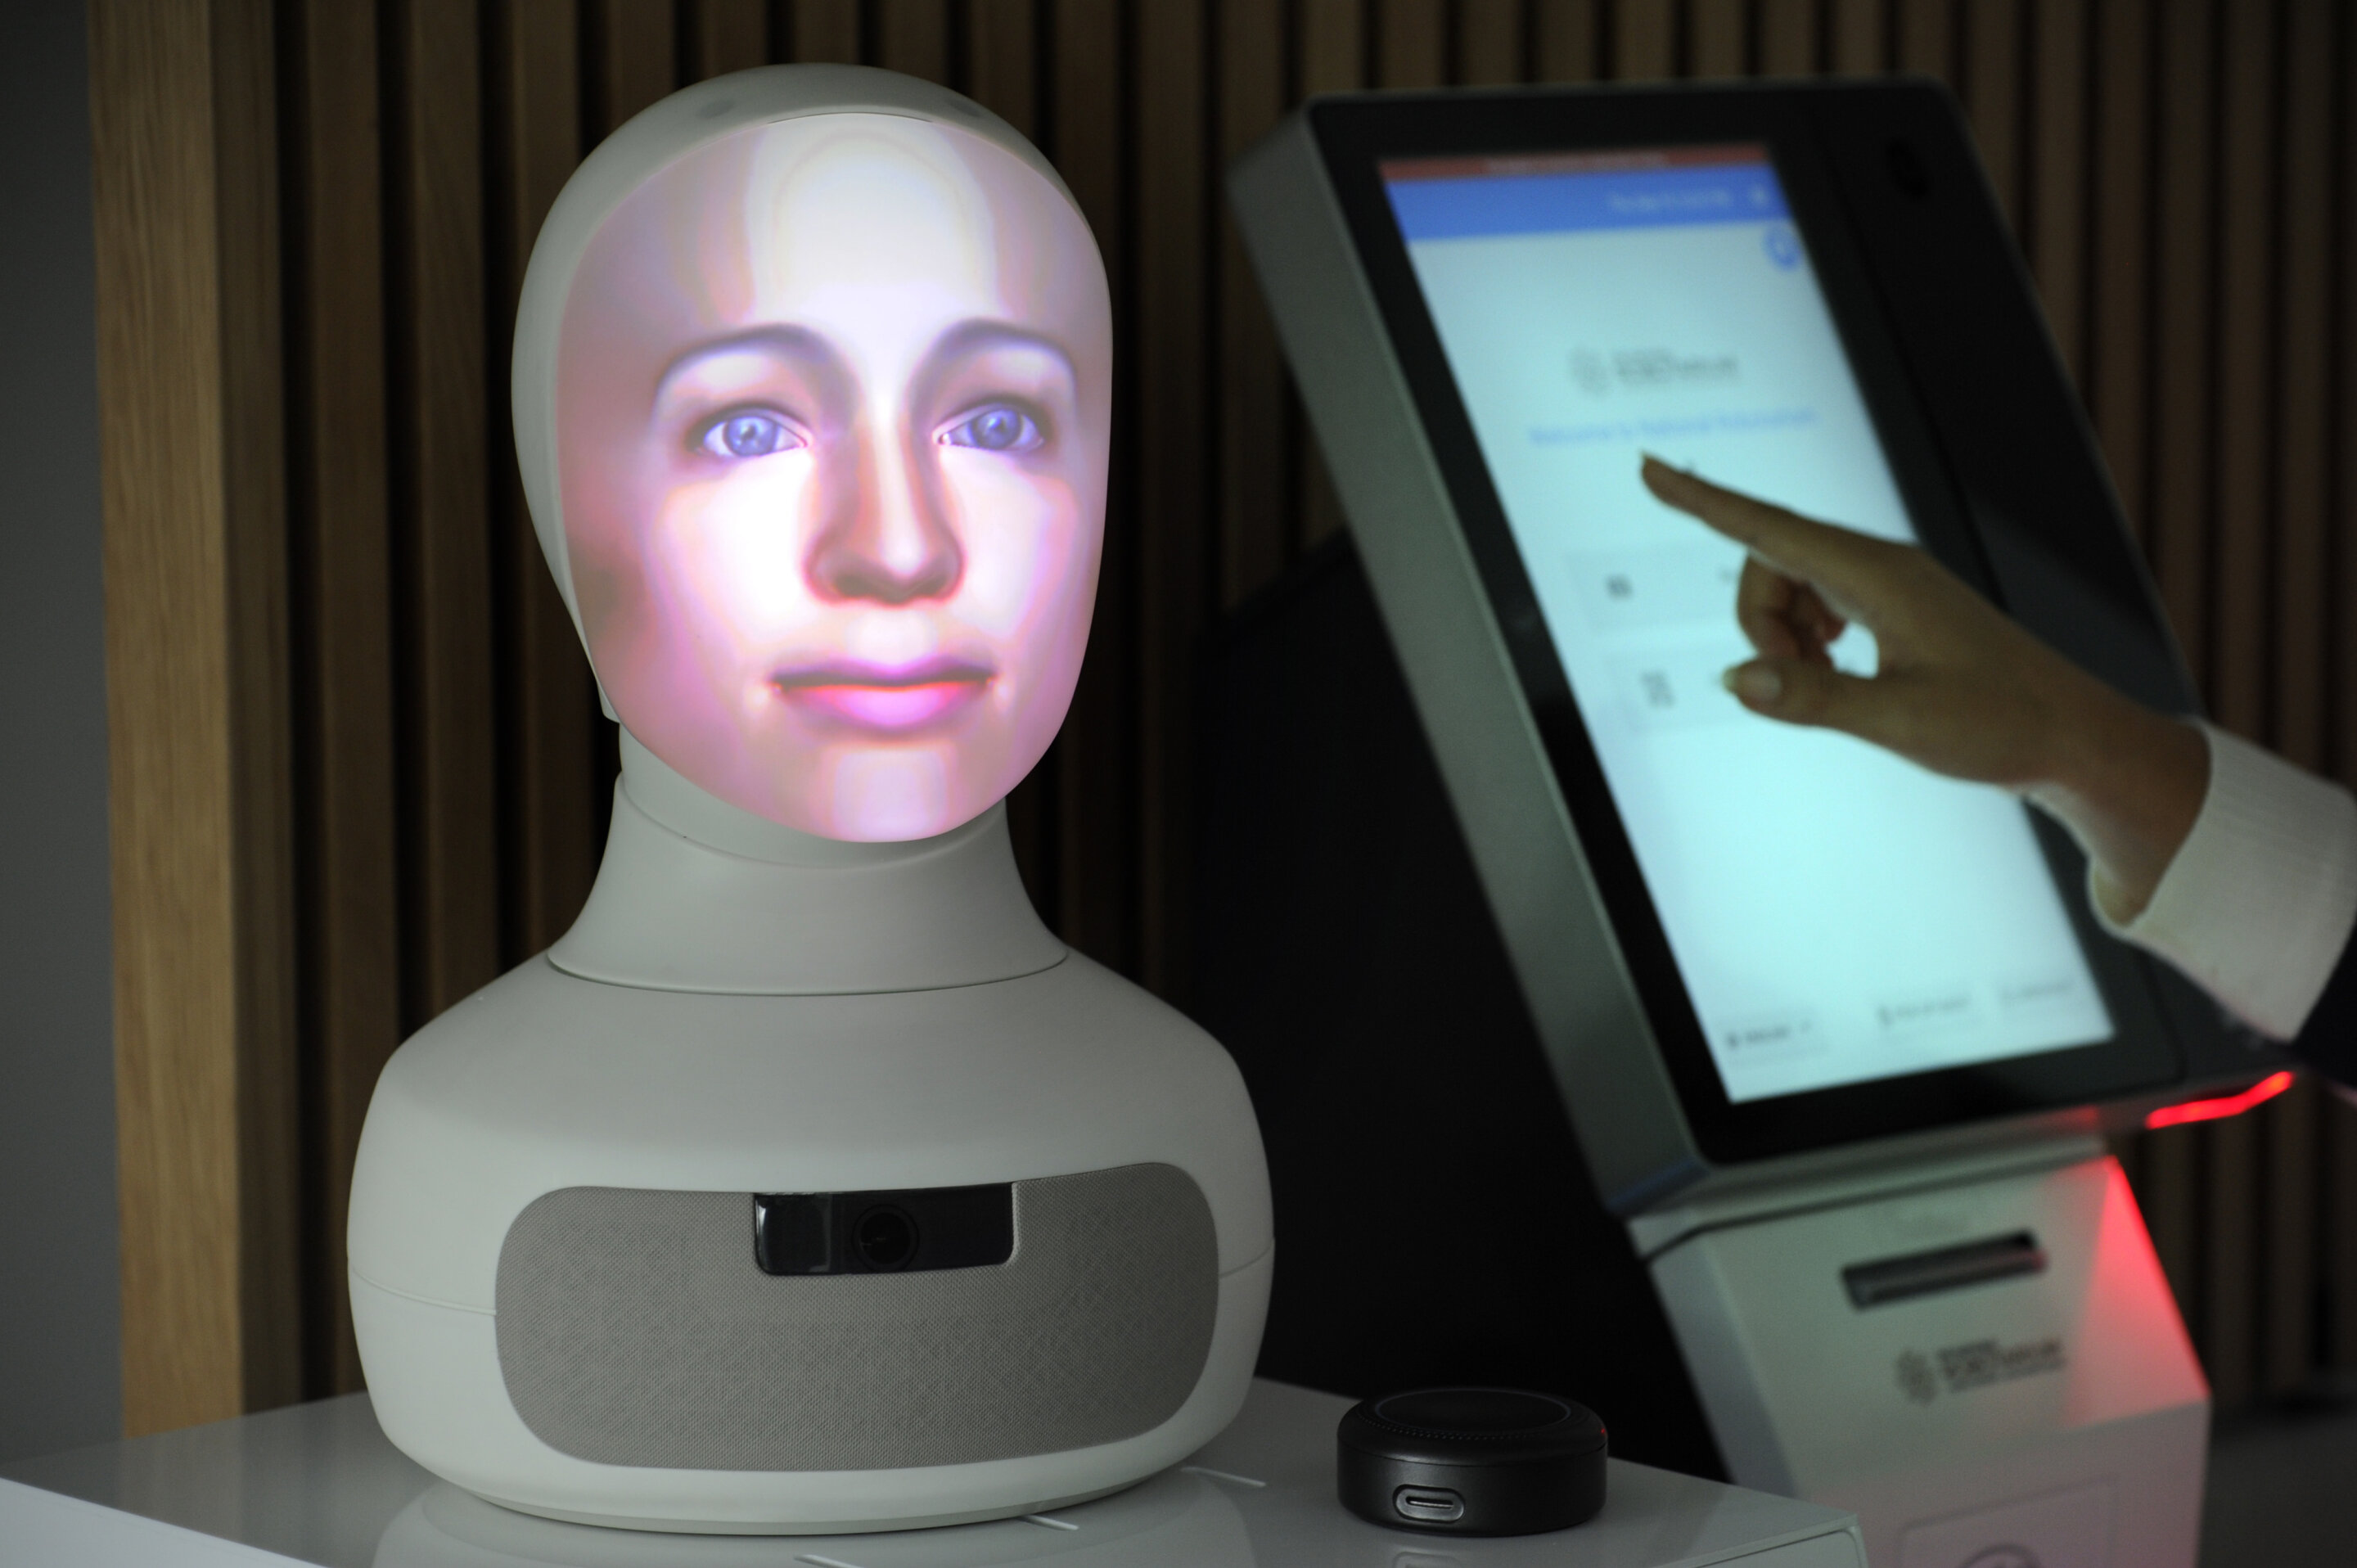 a humanoid bust next to a touchscreen